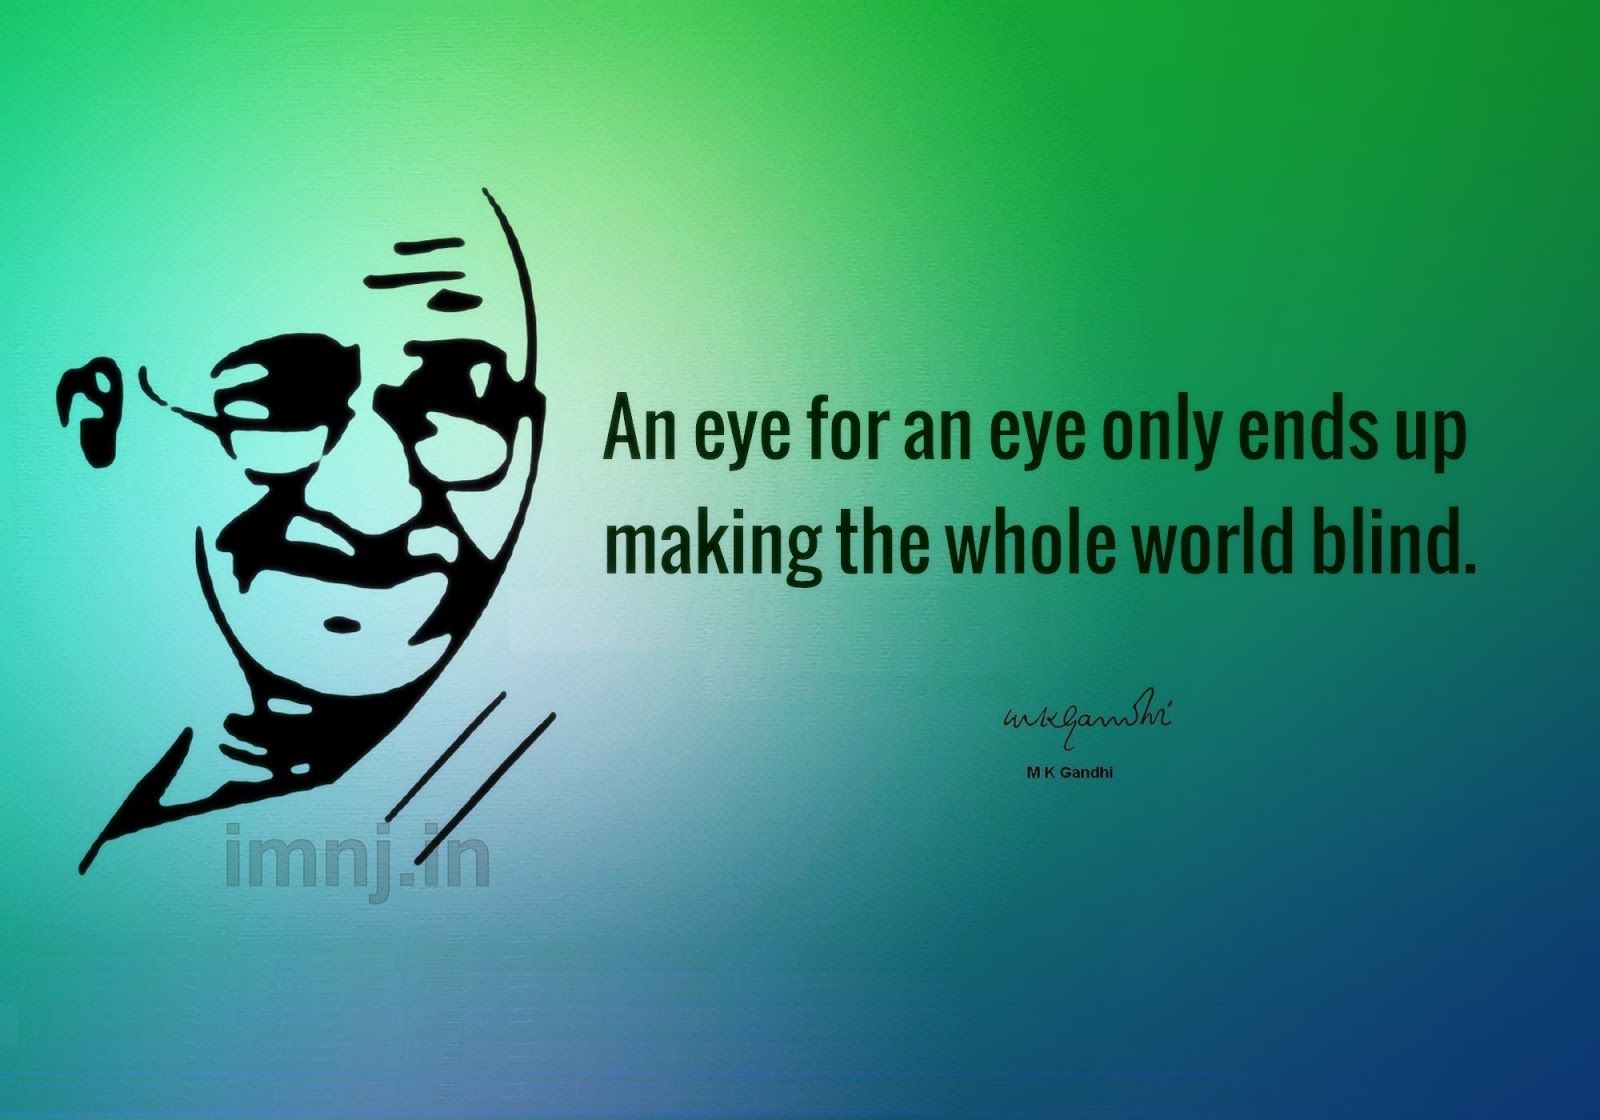 The Awesome Always: Mahatma Gandhi Quotes